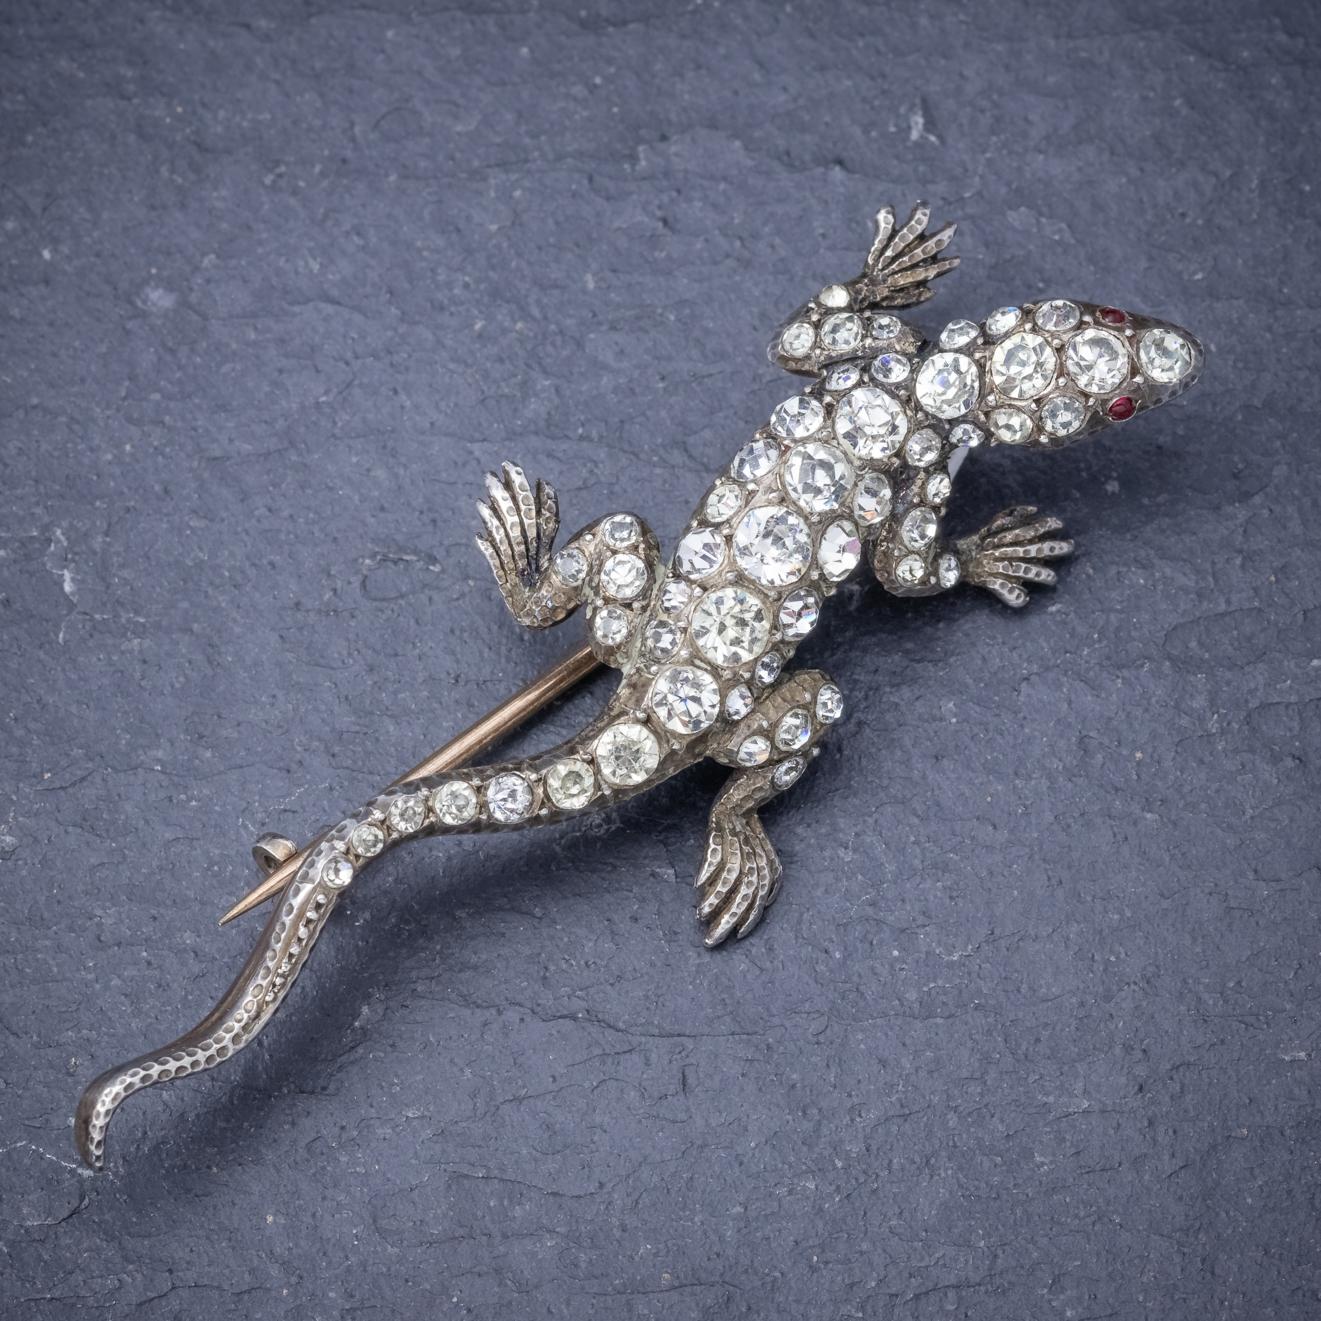 A splendid antique Victorian Lizard brooch decorated with red Paste eyes and a glistening array of clear Paste Stones along the back, head and tail which simulate the sparkle of Diamonds but at a fraction of the cost. 

The Lizard is